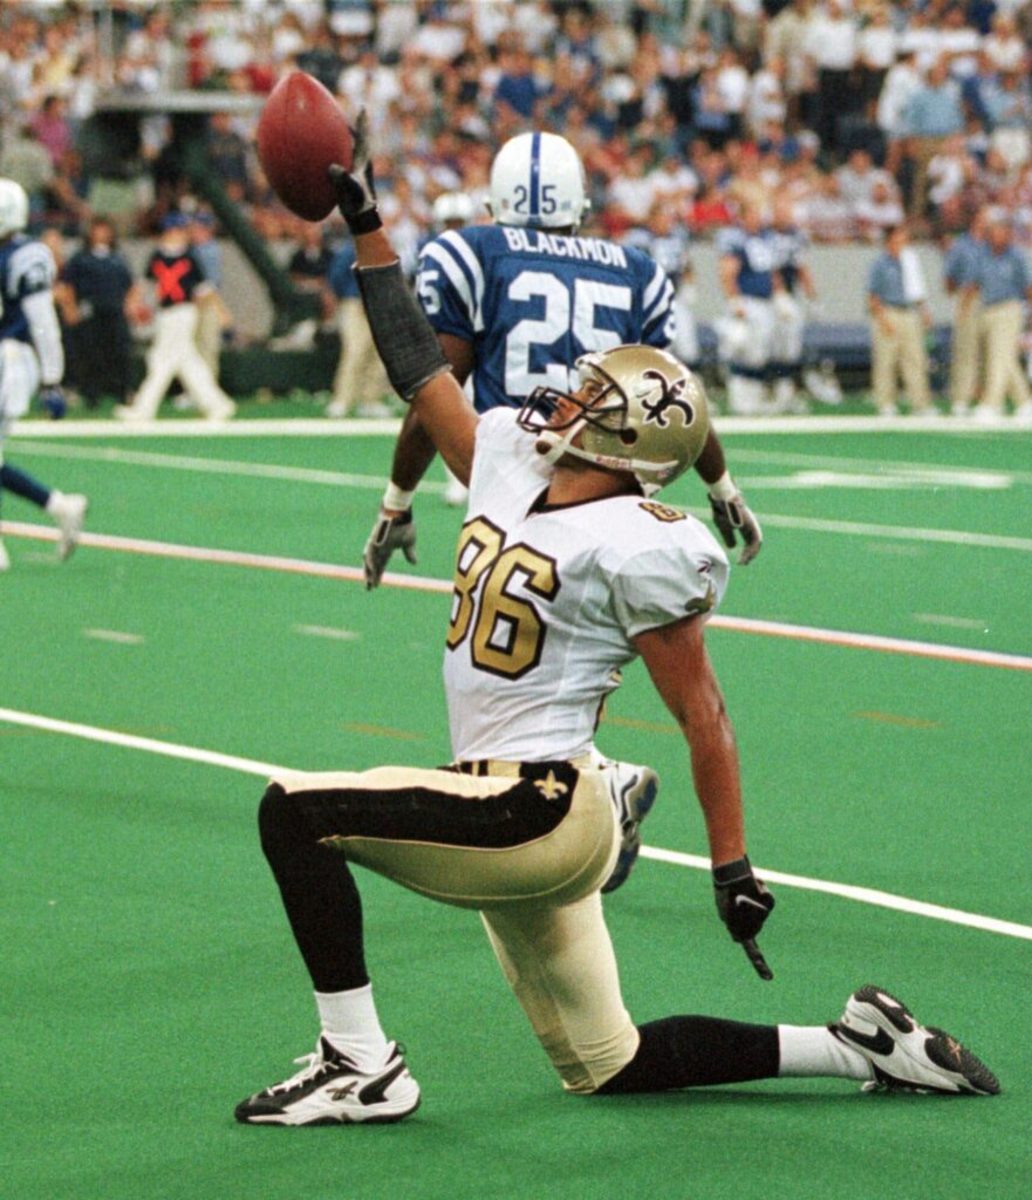 Former New Orleans Saints WR Sean Dawkins (86) during a 1998 game against the Indianapolis Colts. Credit: Indianapolis Recorder